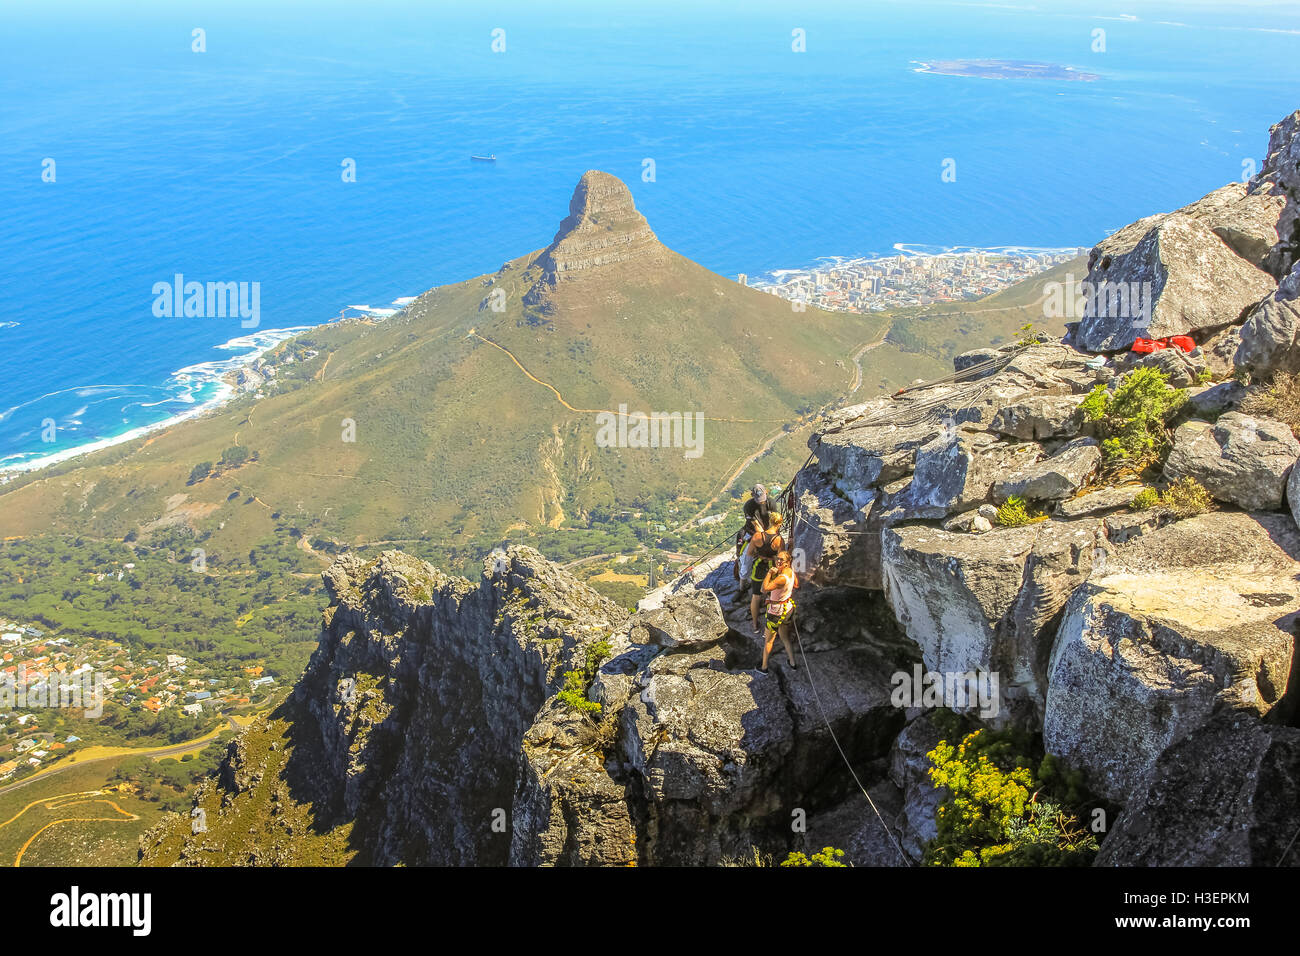 Table Mountain trekking Banque D'Images